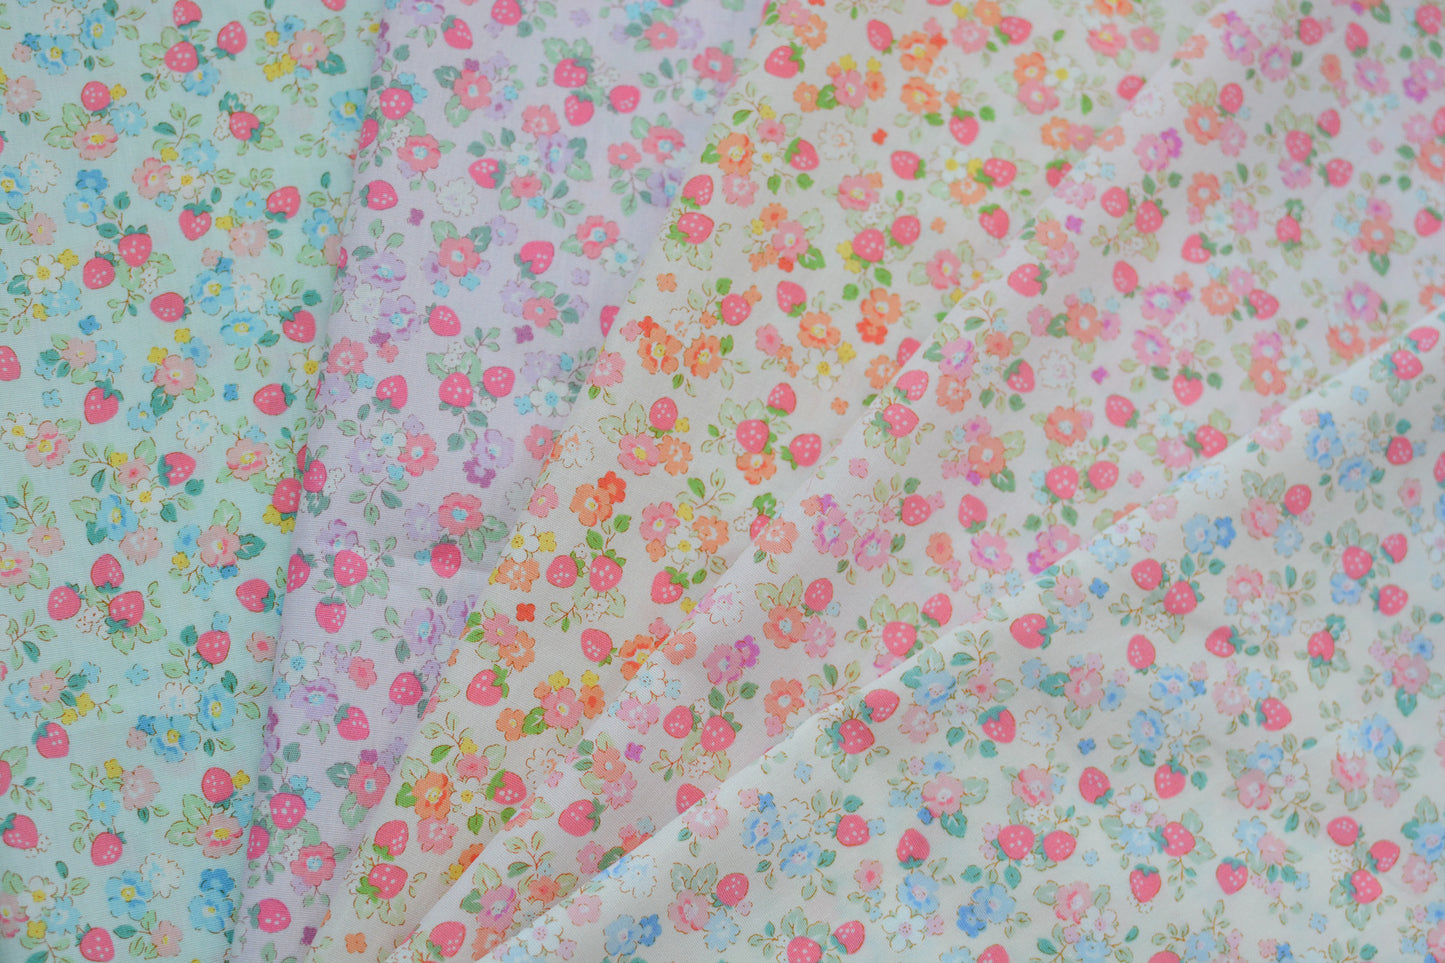 Find Me Strawberry Field Light Cream Broadcloth Cosmo 1B Japanese Fabric